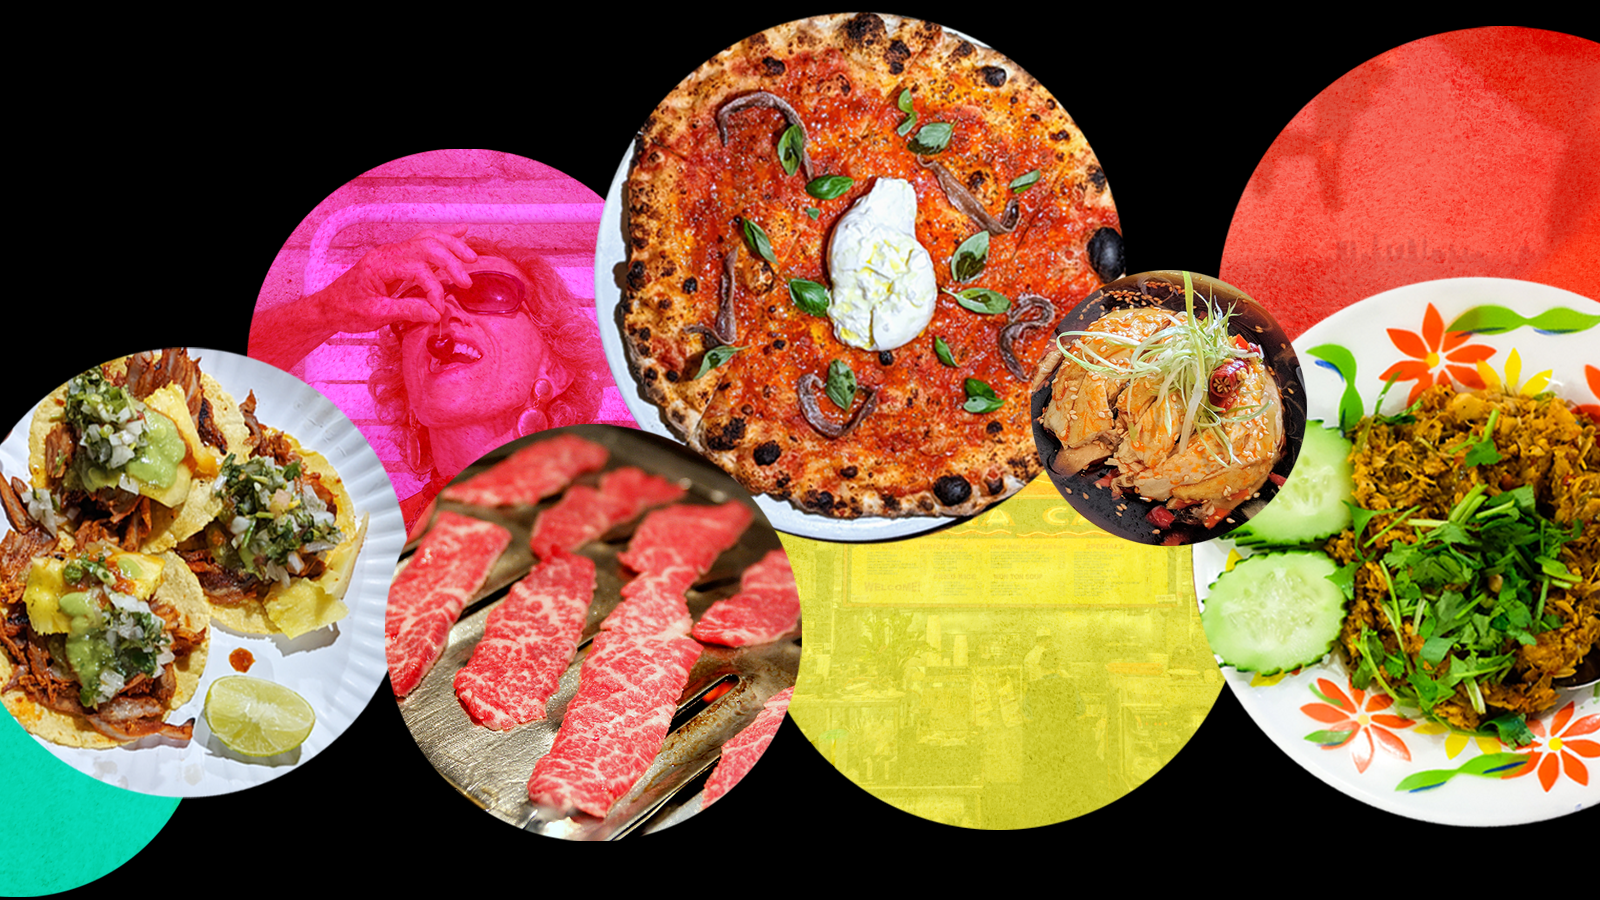 Illustration with various foods from Los Angeles, including pizza, tacos, Korean barbecue meats, and fried rice.